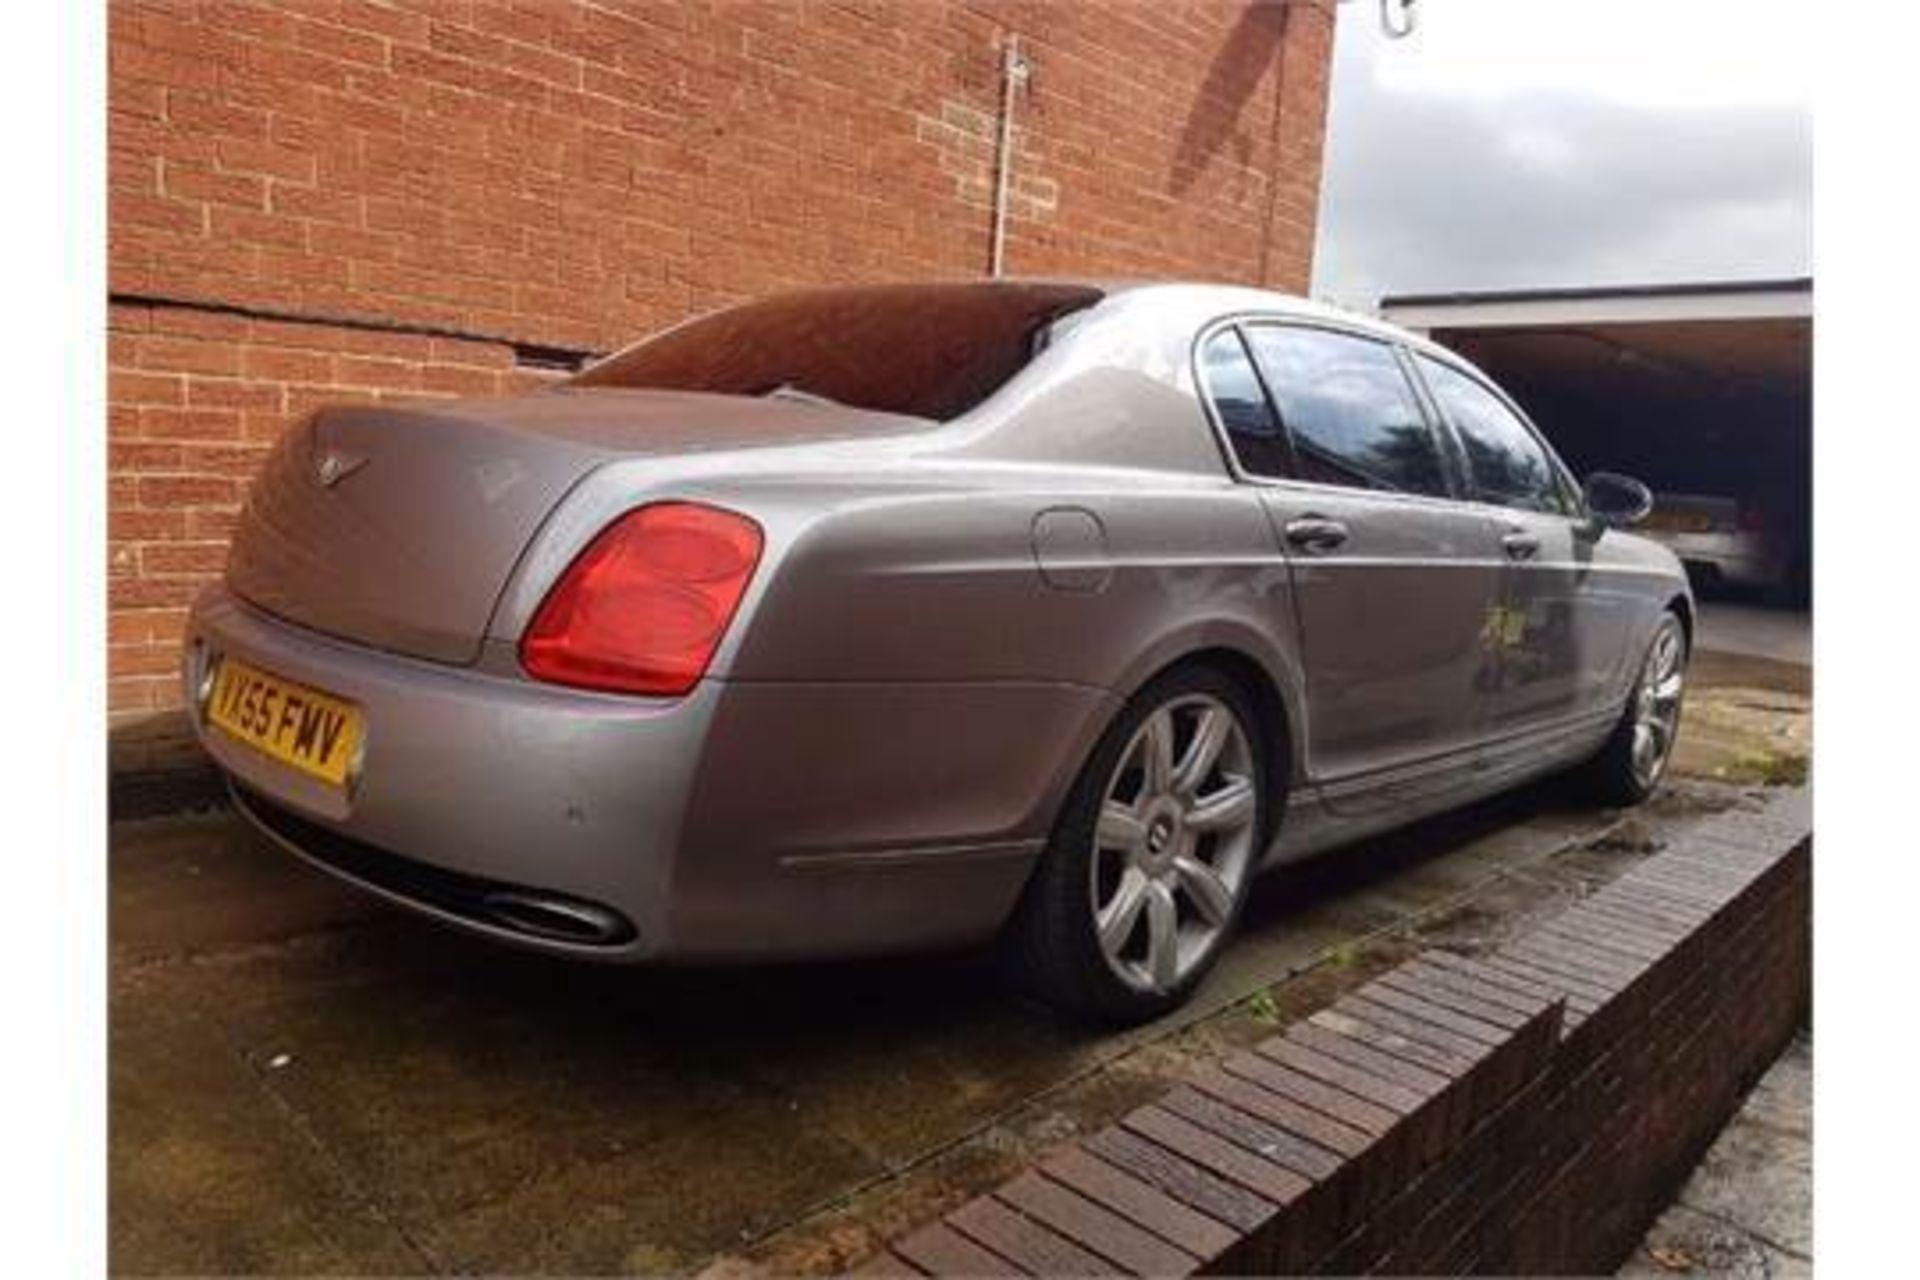 BENTLEY FLYING SPUR 6.0L 4 DOOR SALOON IN SILVER. VX55 FMV. CURRENT RECORDED MILAGE 170,000 MILES. - Image 2 of 8